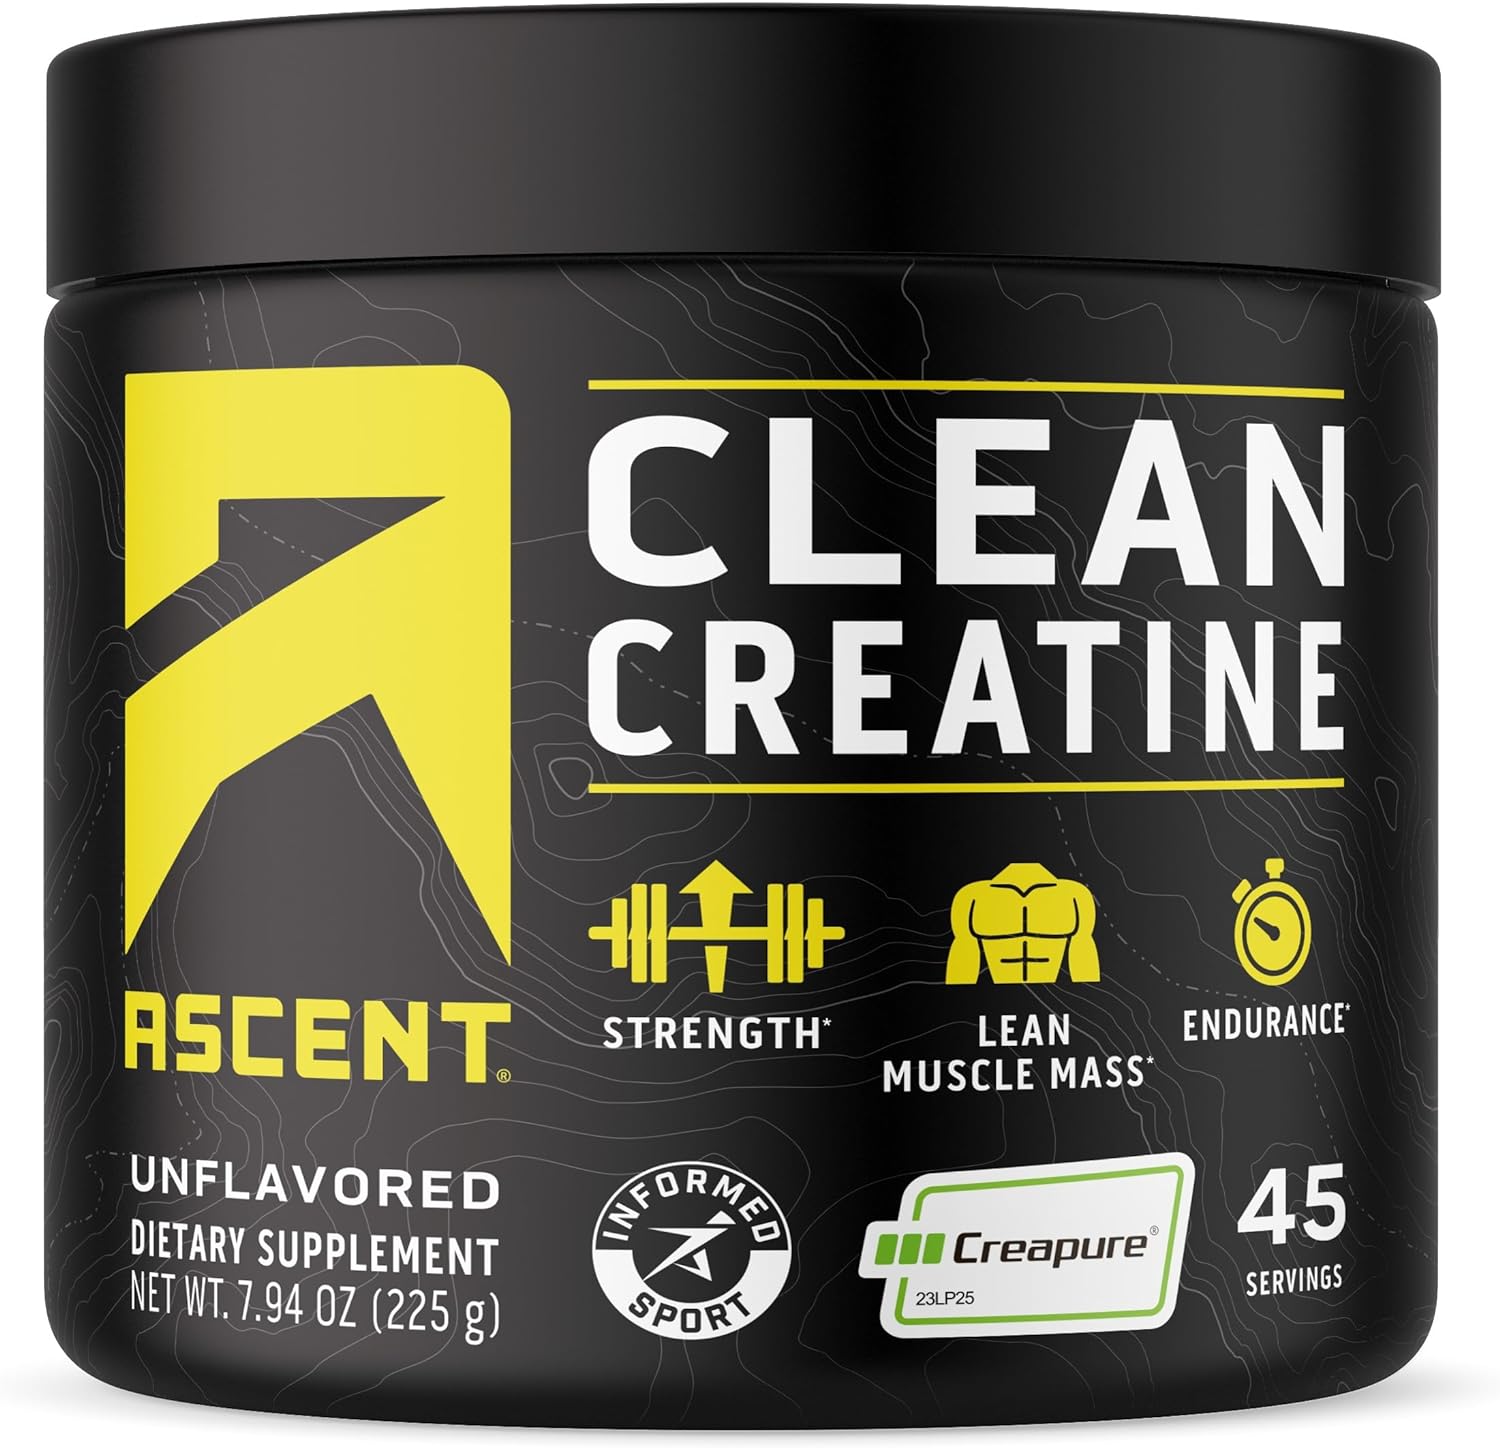 Ascent Clean Creatine Monohydrate Powder - 5G Per Serving, Creapure Creatine Supplement - Unflavored, 45 Servings